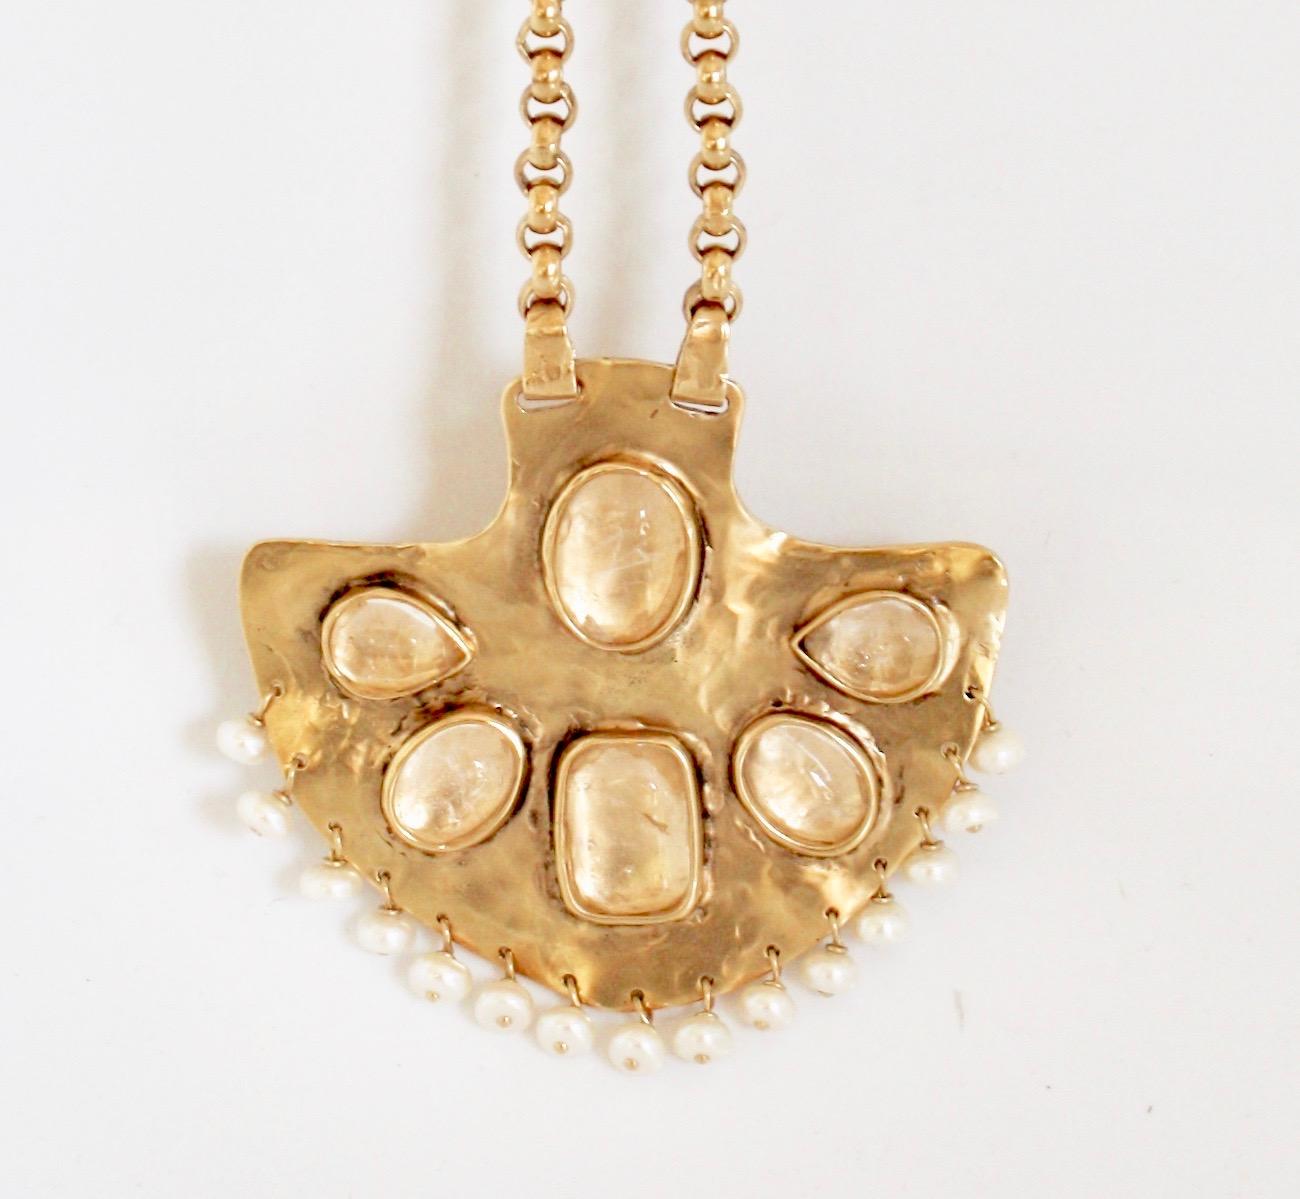 Gold-toned brass pendant necklace from Goossens Paris with natural pearls and rock crystals on chain. 

Pendant is 3